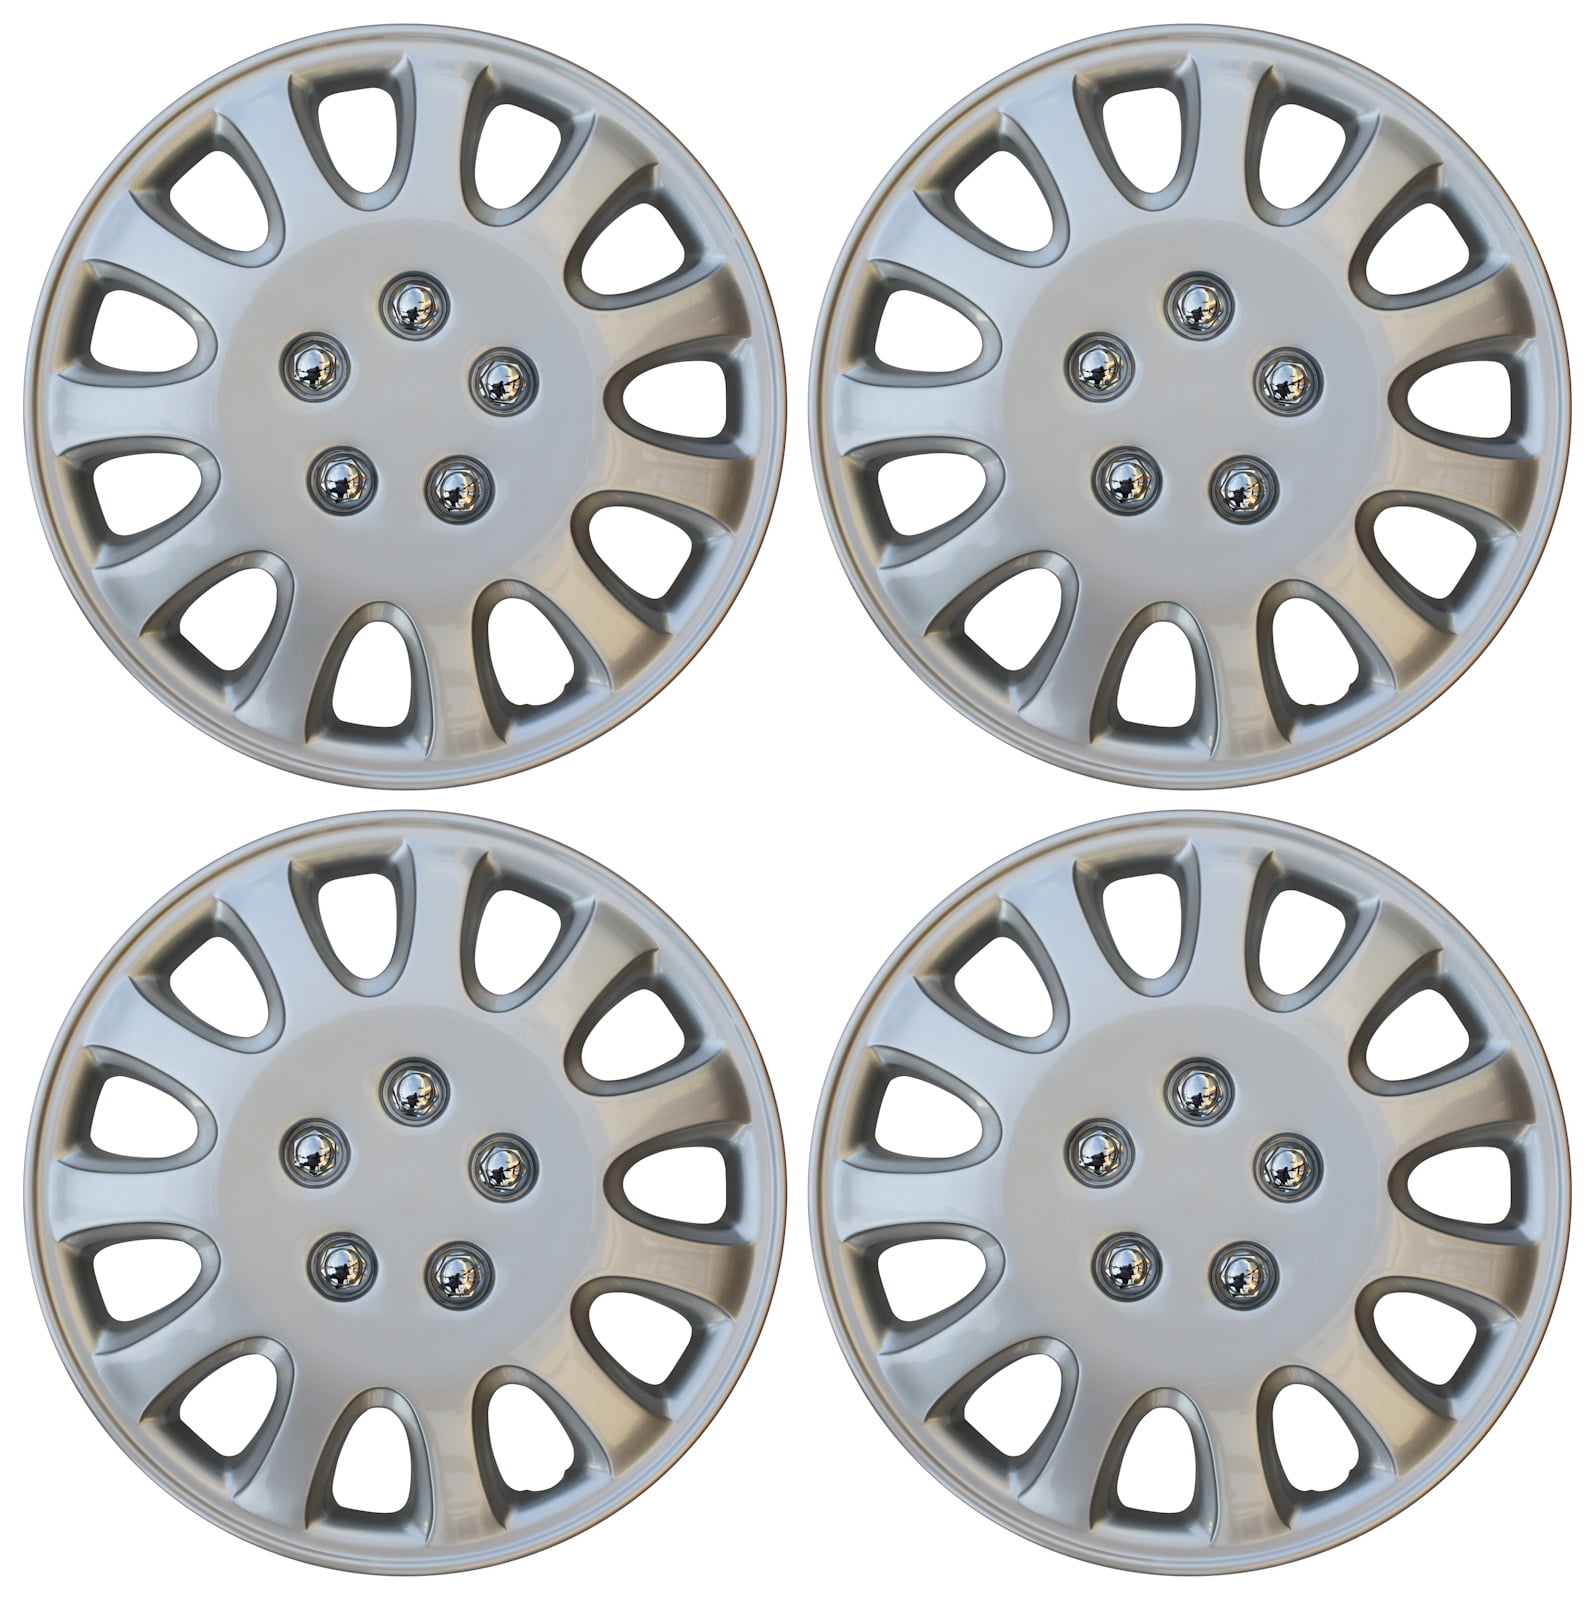 Rims Cover Wheel Skin Covers 14" Inches ABS Plastic Hubcap 4pcs Style #B717 